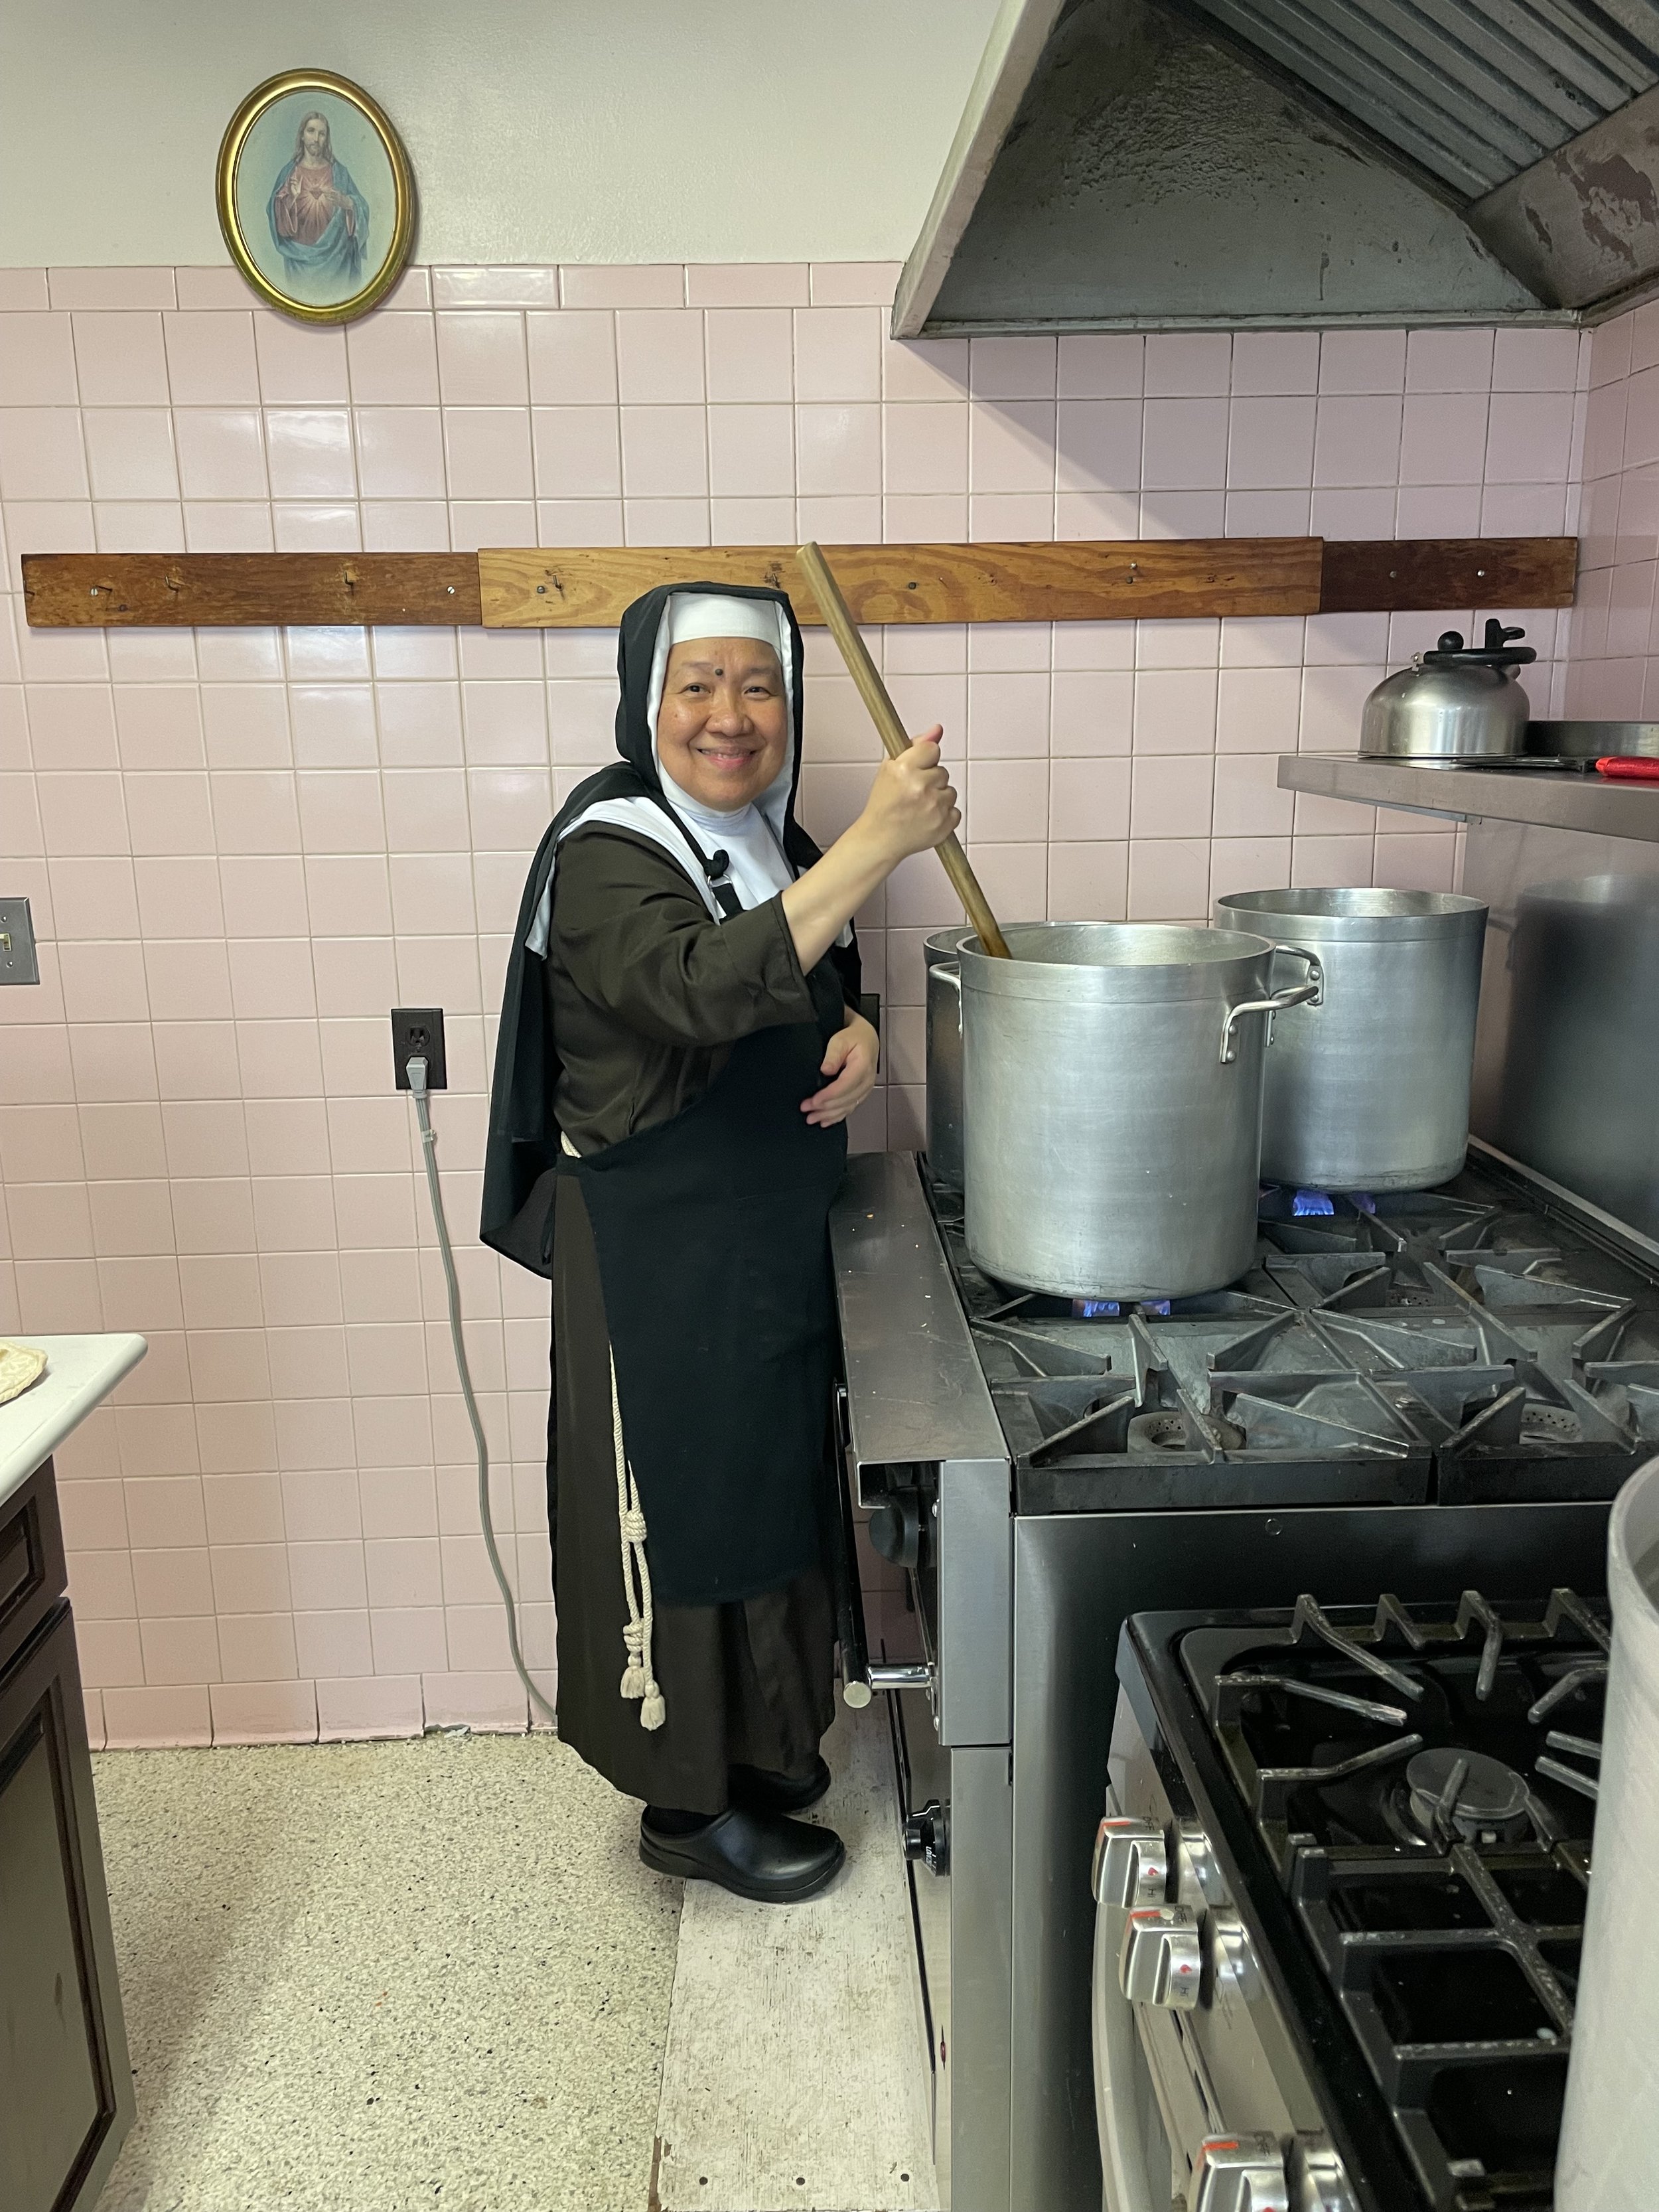  And here is our "good and well-behaved” and very beloved abbess Mother Mary Gertrude…and yes she does approve of all of the comments this Sister makes as part of Obedience. 